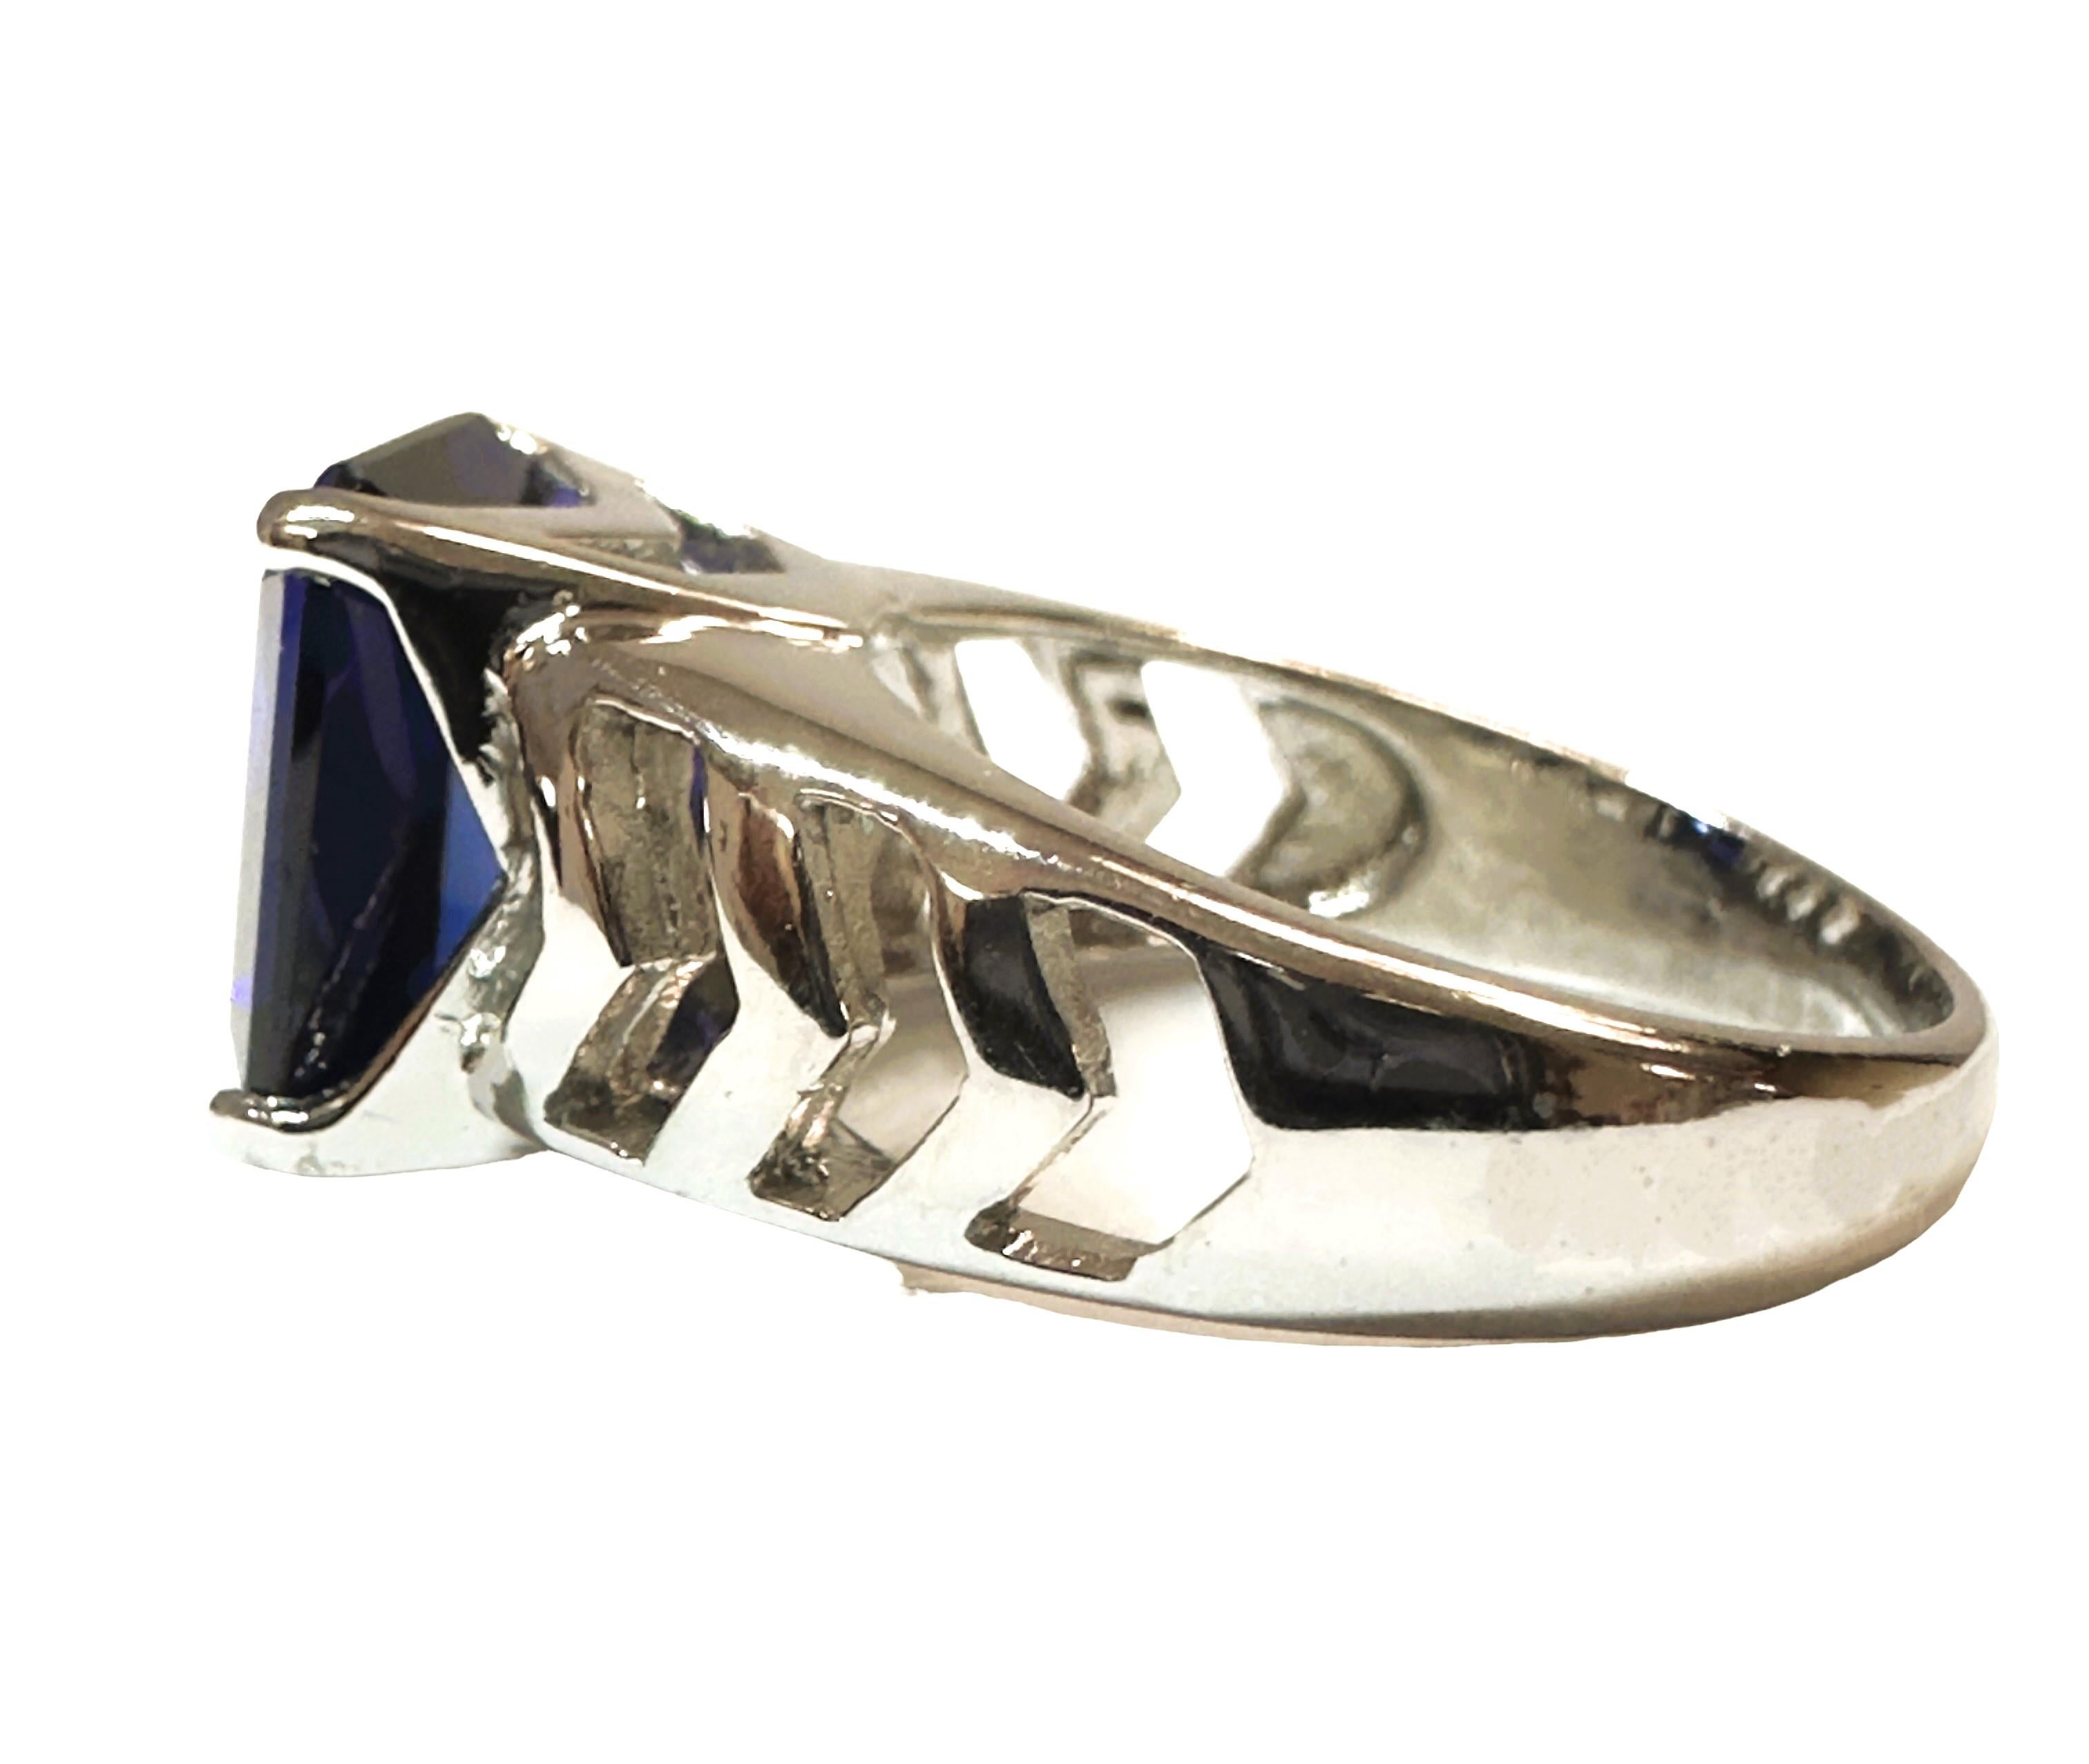 Art Deco New Handmade African 8.30 Ct Royal Blue Sapphire Sterling Ring Size 7.25 For Sale